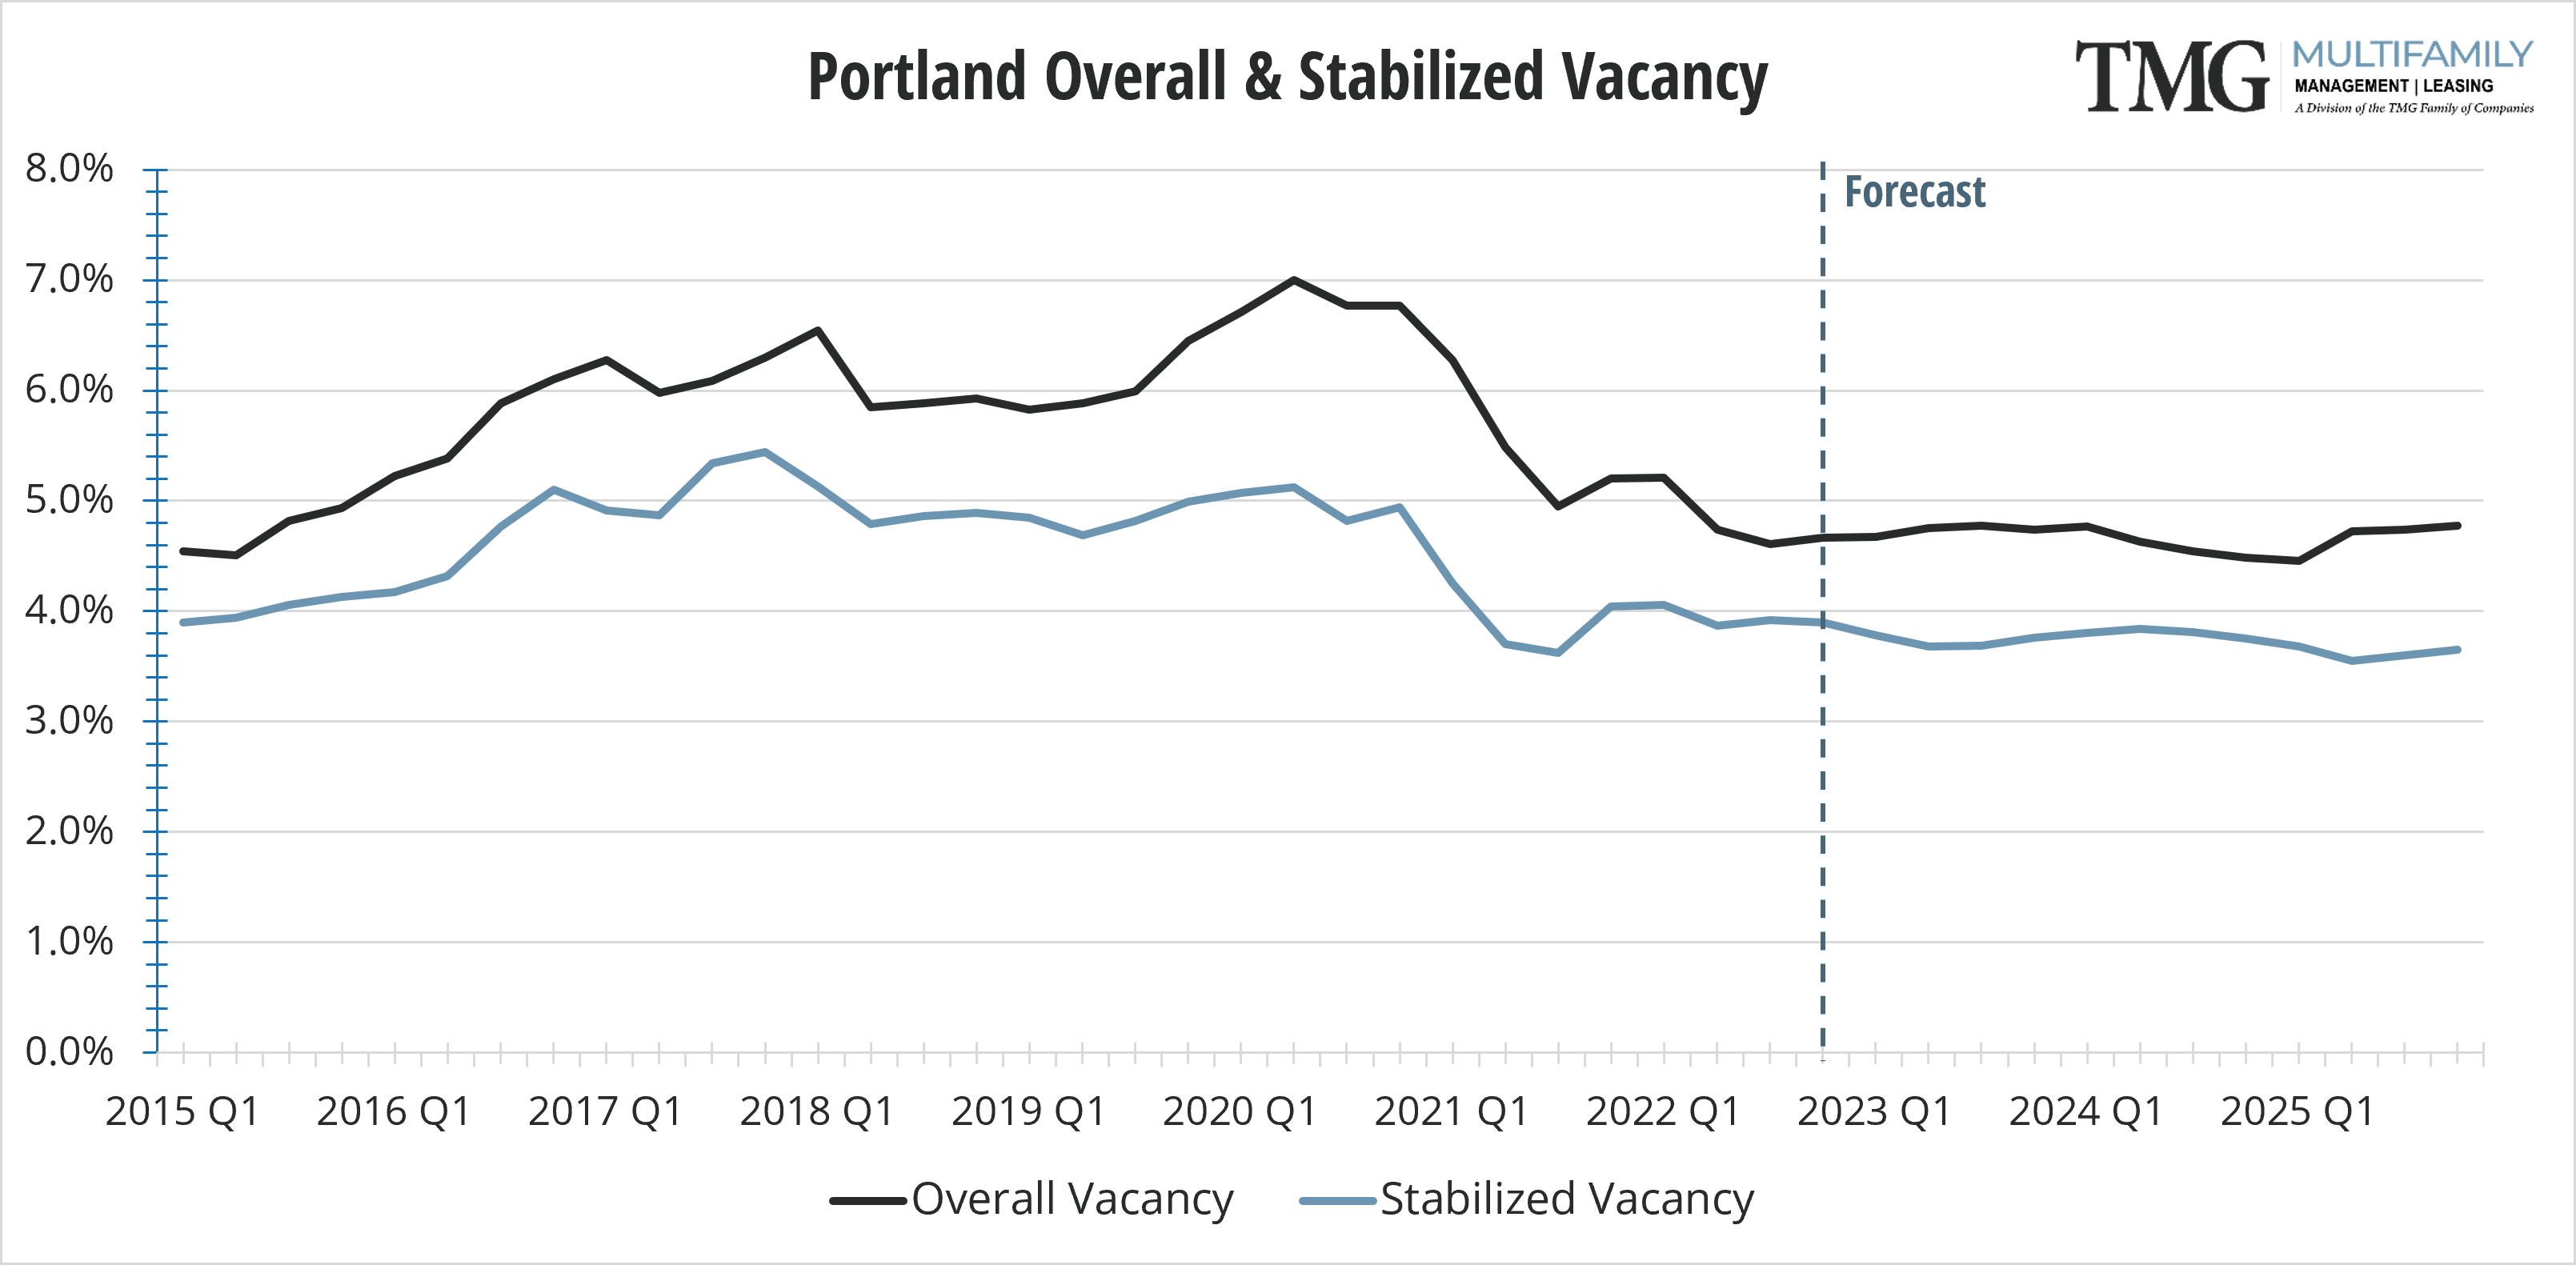 PDX Overall & Stabilized Vacancy